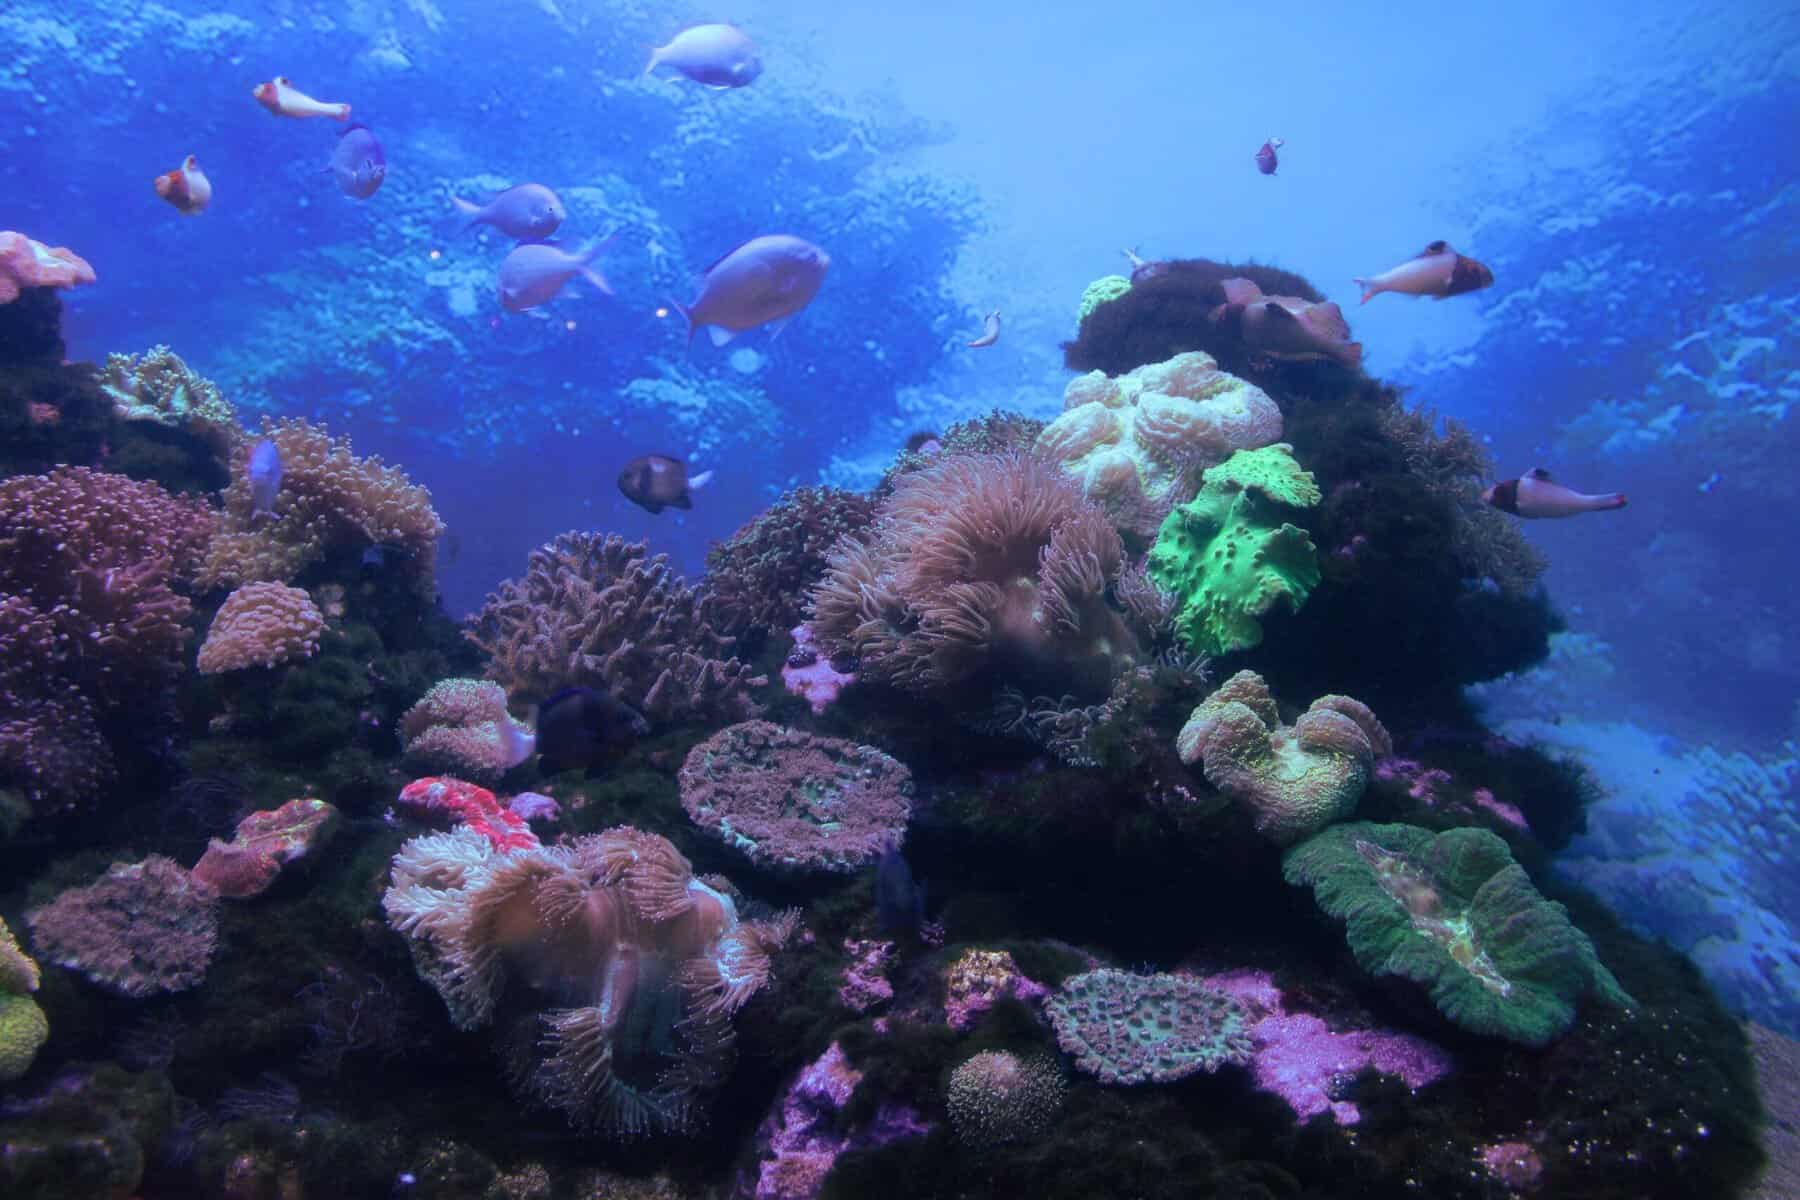 The colorful underwater scenes of Great Barrier Reef